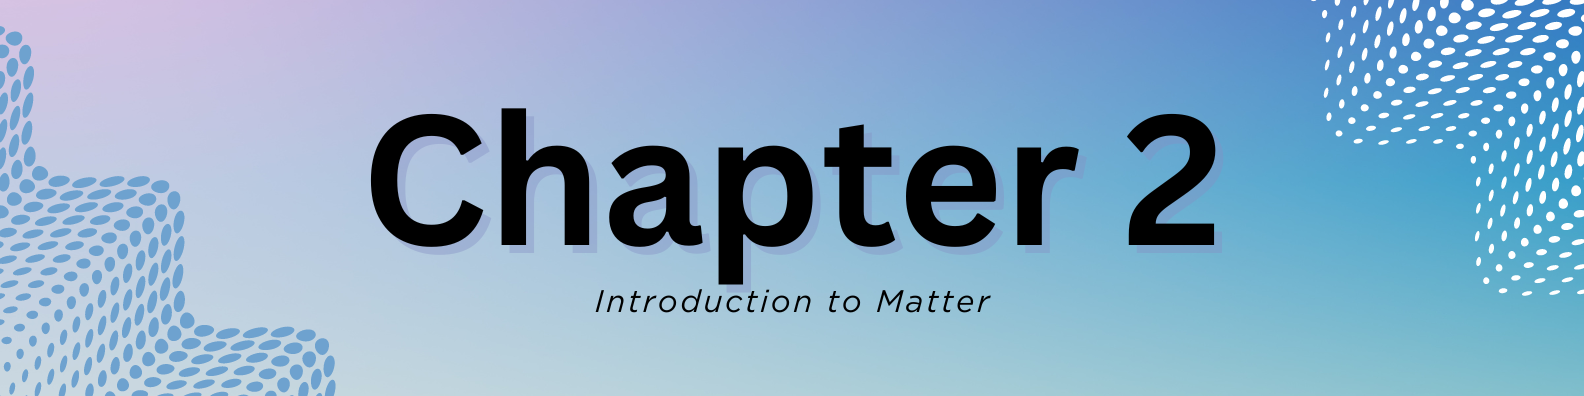 Chapter 2 - Introduction to Matter